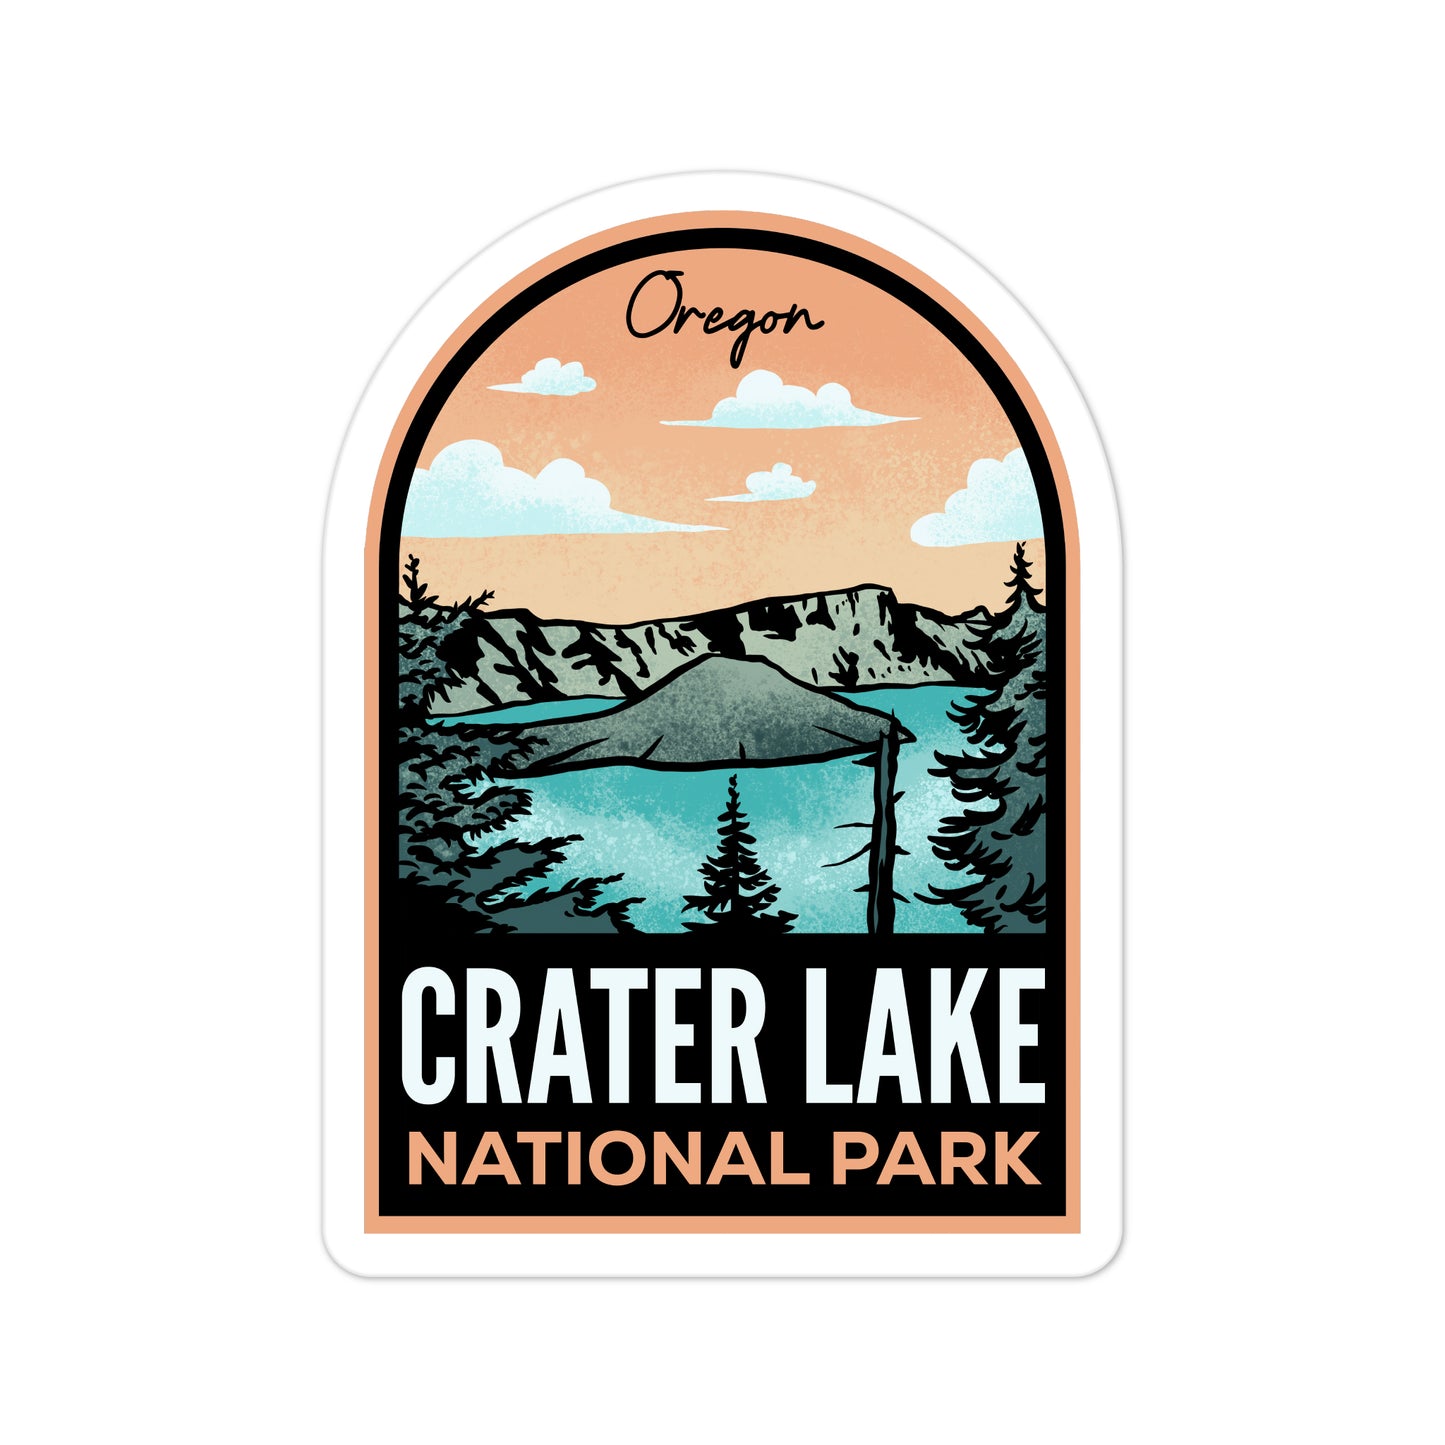 A sticker of Crater Lake National Park